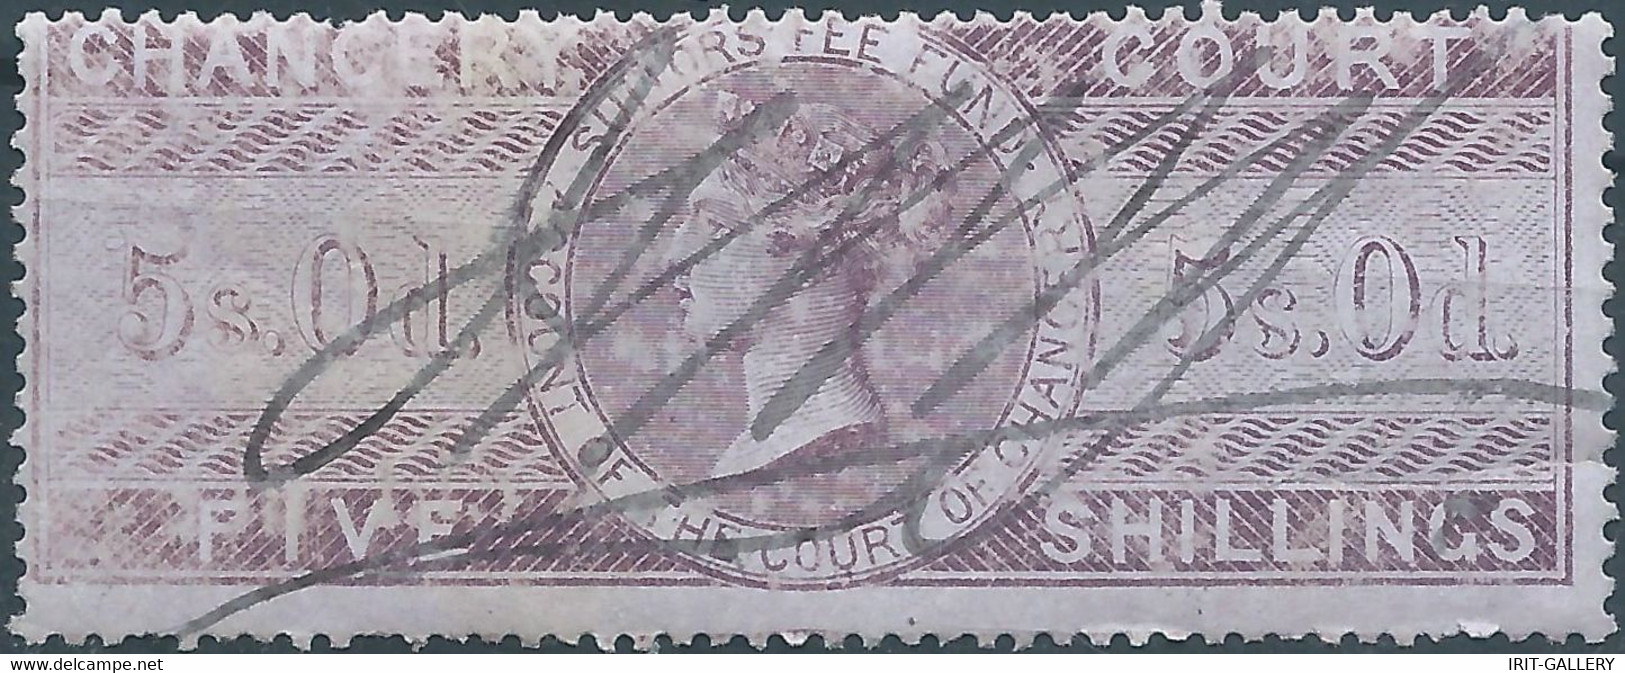 Great Britain-ENGLAND,Queen Victoria,1855 /1870 Revenue Stamp Tax Fiscal CHANCERY COURT,5s.0d. FIVE Shillings,Used - Fiscales